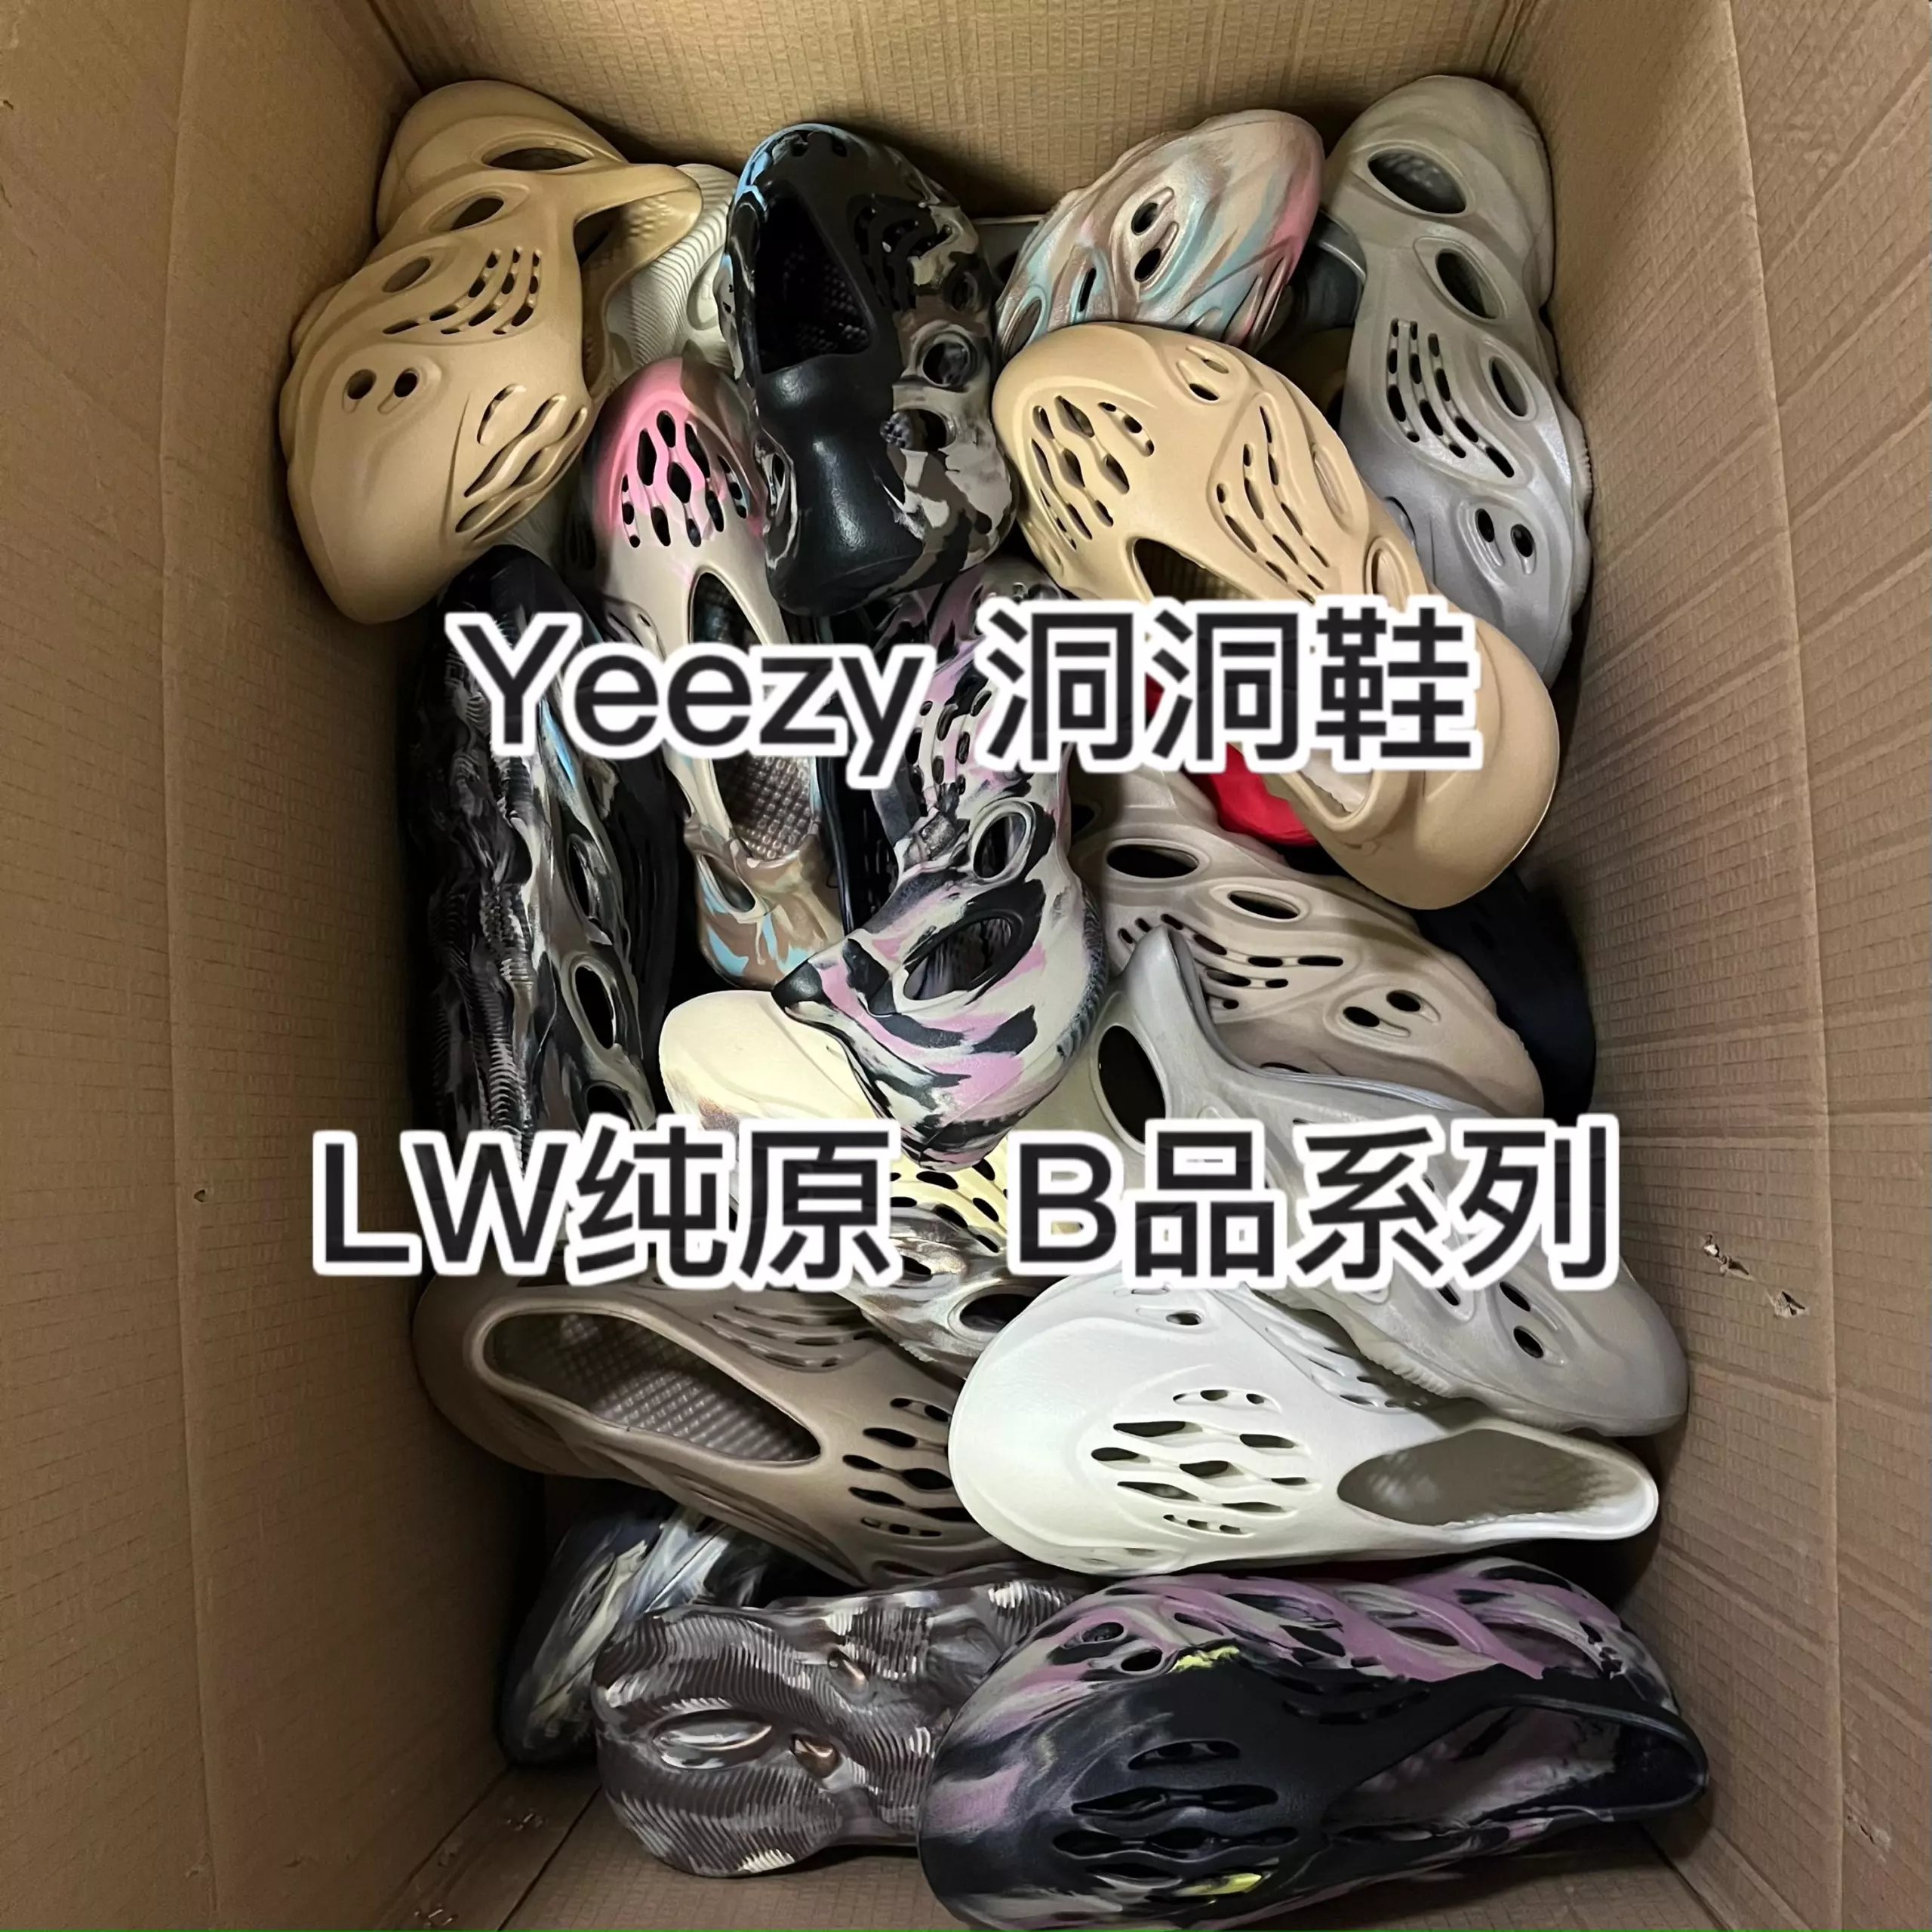 Item Thumbnail for [Non-returnable] Yeezy hole shoes LW pure original B product welfare size is recommended to choose 1-2 sizes too large